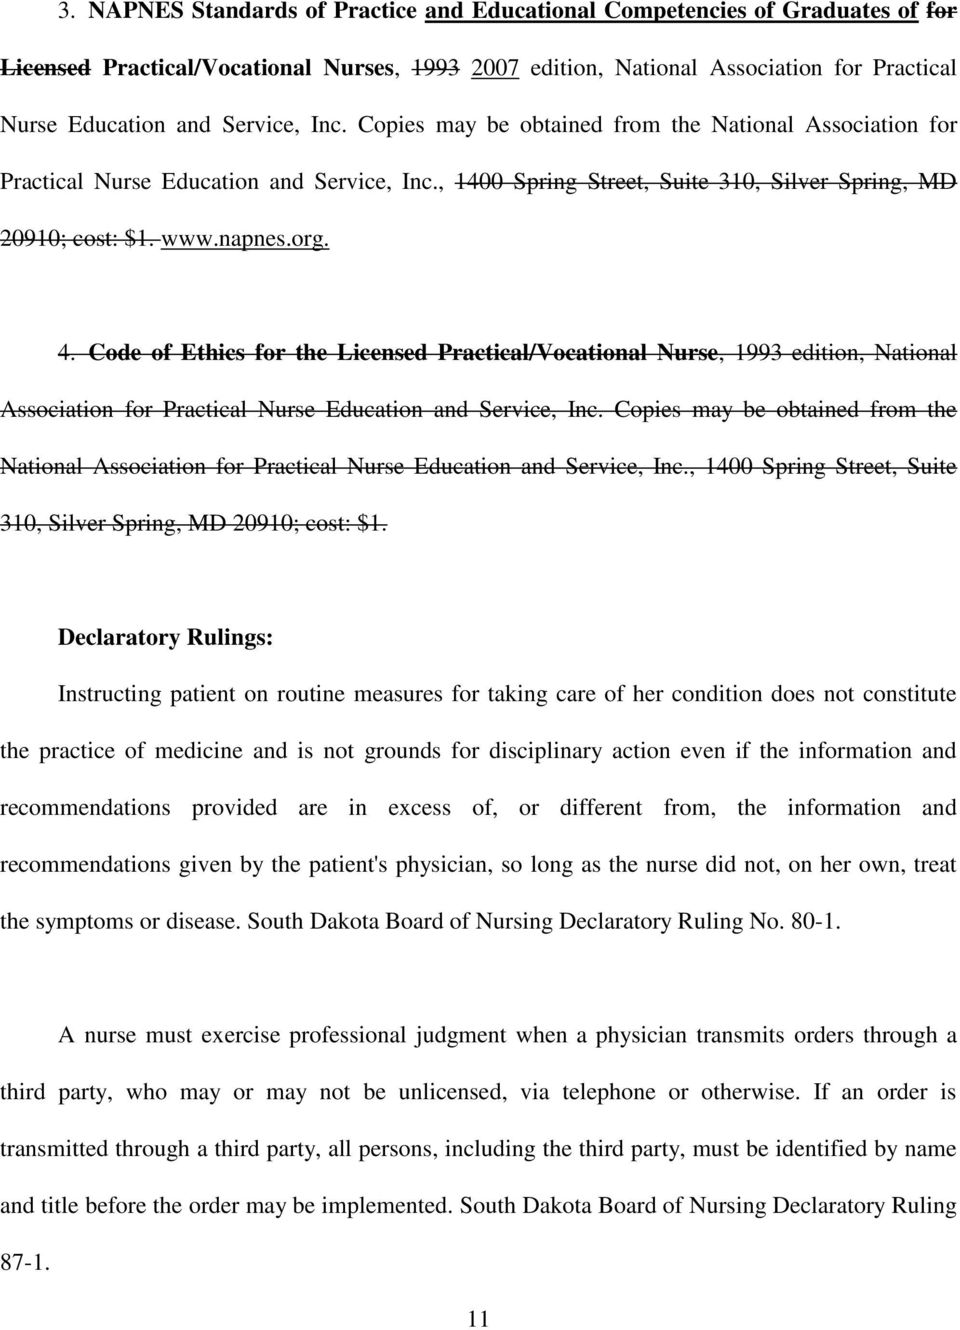 Code of Ethics for the Licensed Practical/Vocational Nurse, 1993 edition, National Association for Practical Nurse Education and Service, Inc.